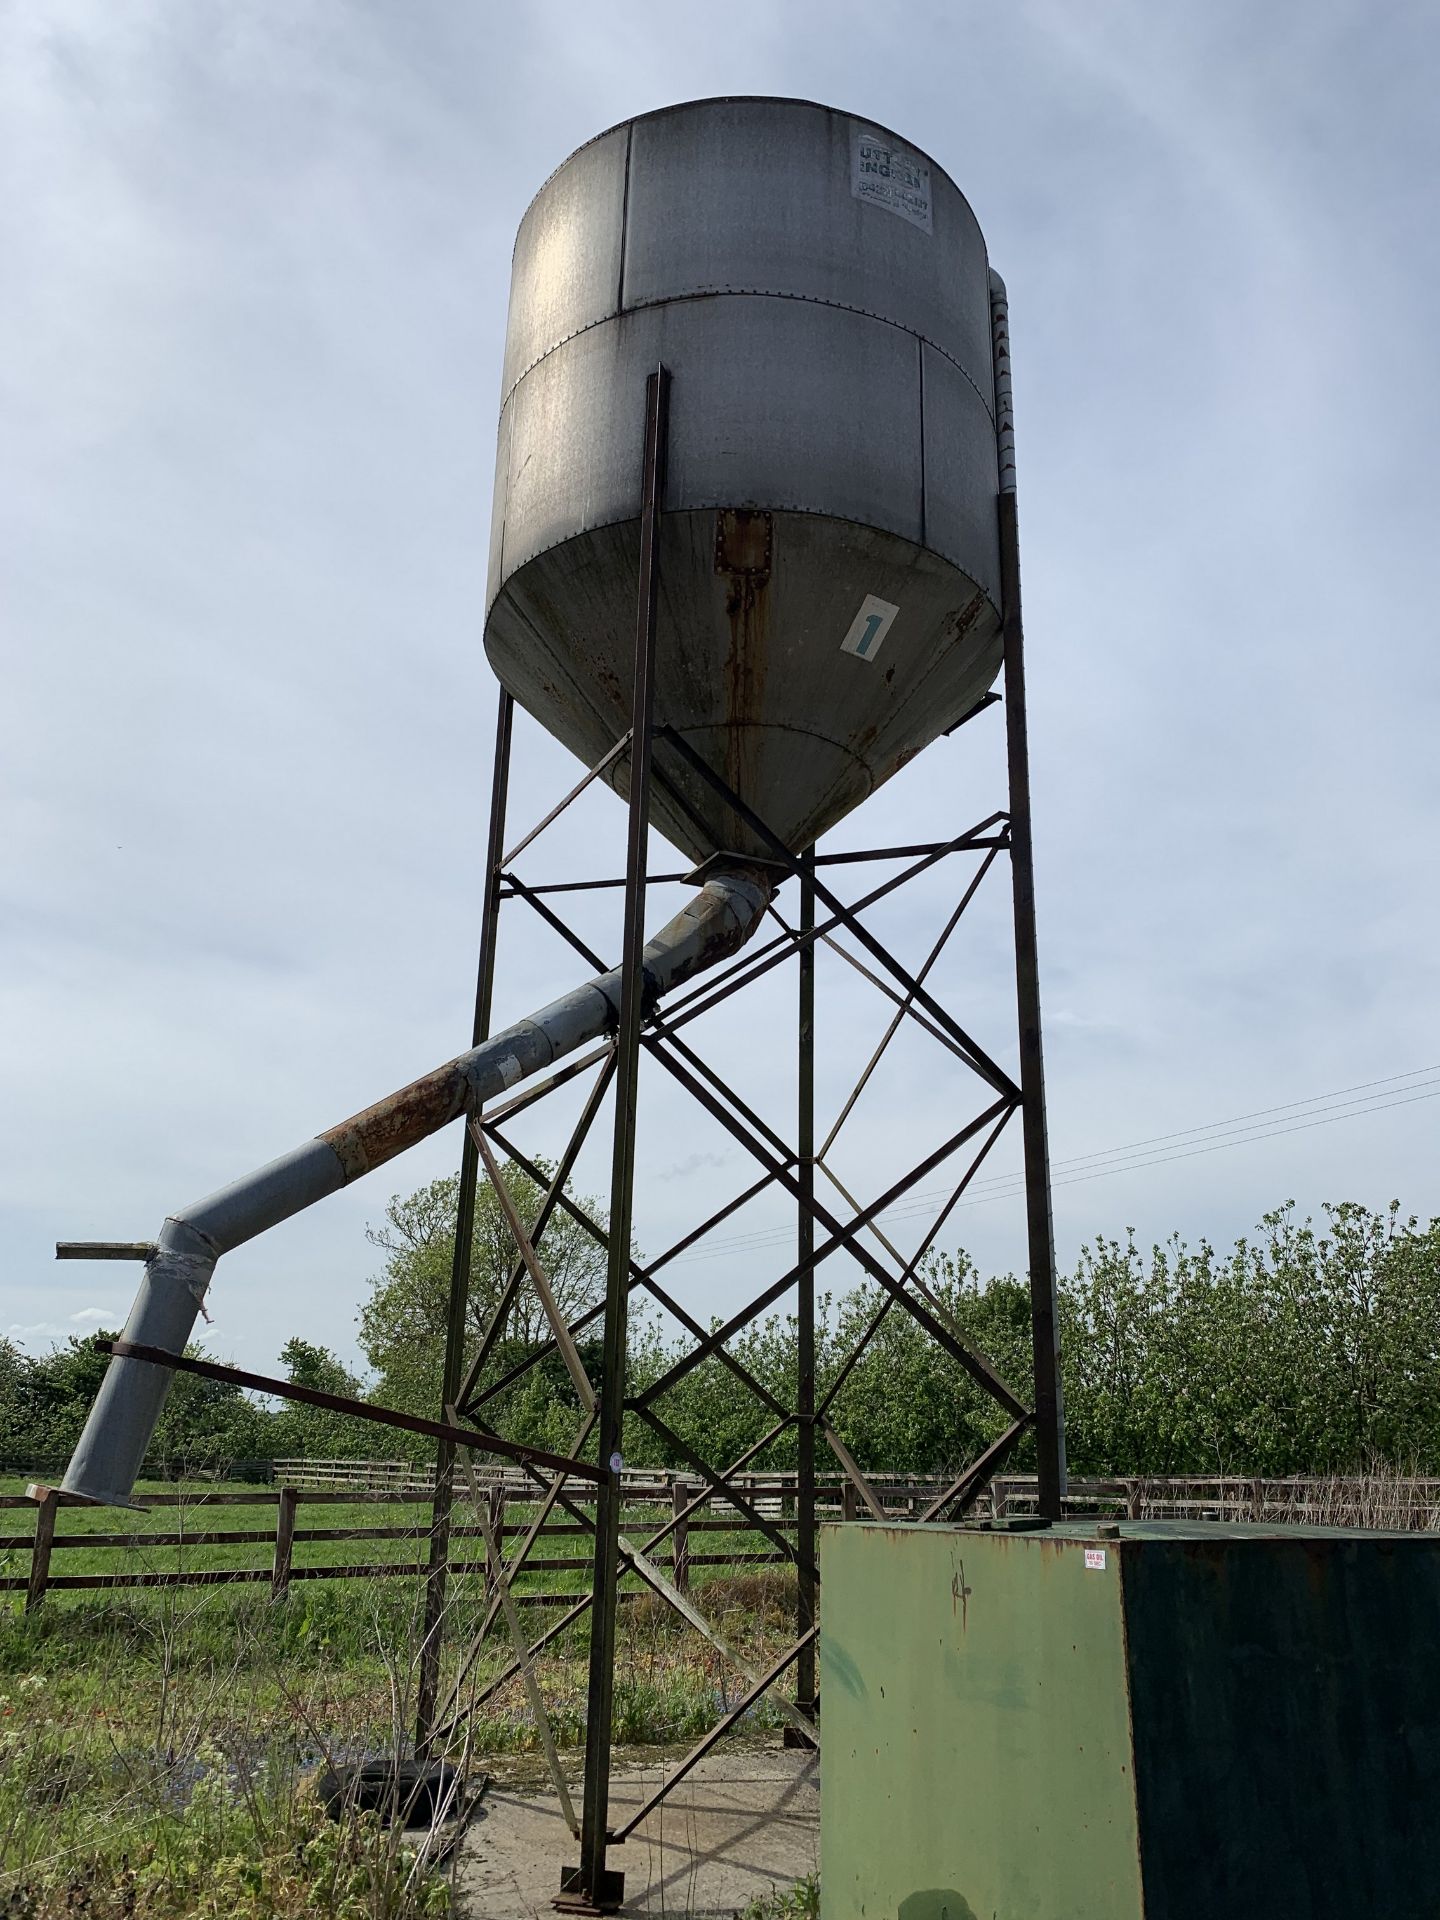 Feed silo, purchaser to arrange loading